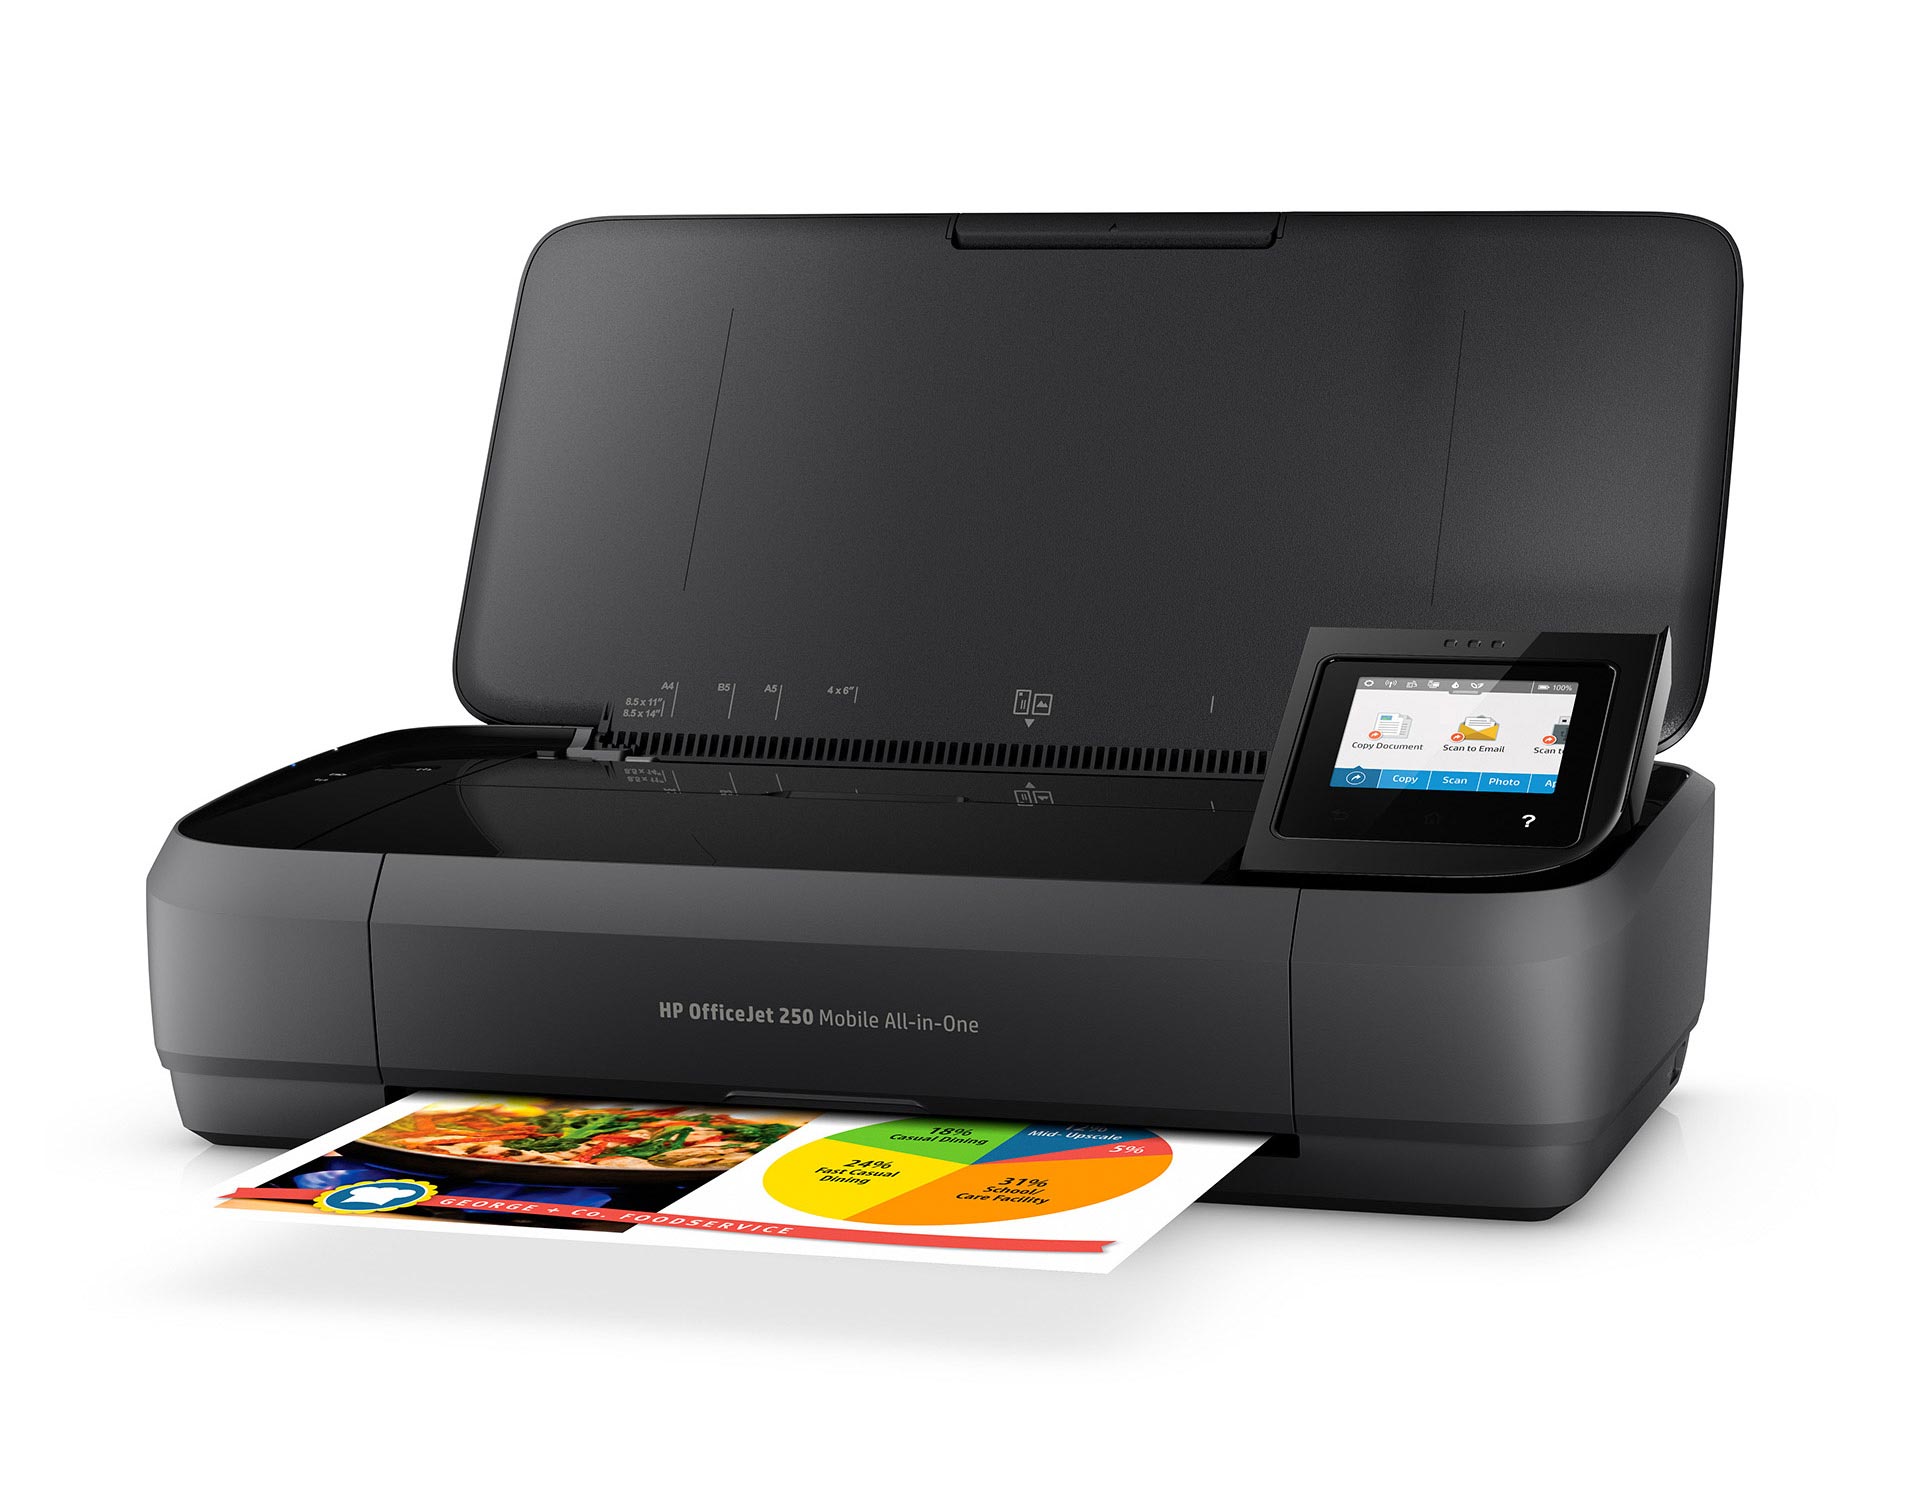 PC/タブレット PC周辺機器 HP OfficeJet 250 Mobile AiO（CZ992A#ABJ）プリンター製品詳細 